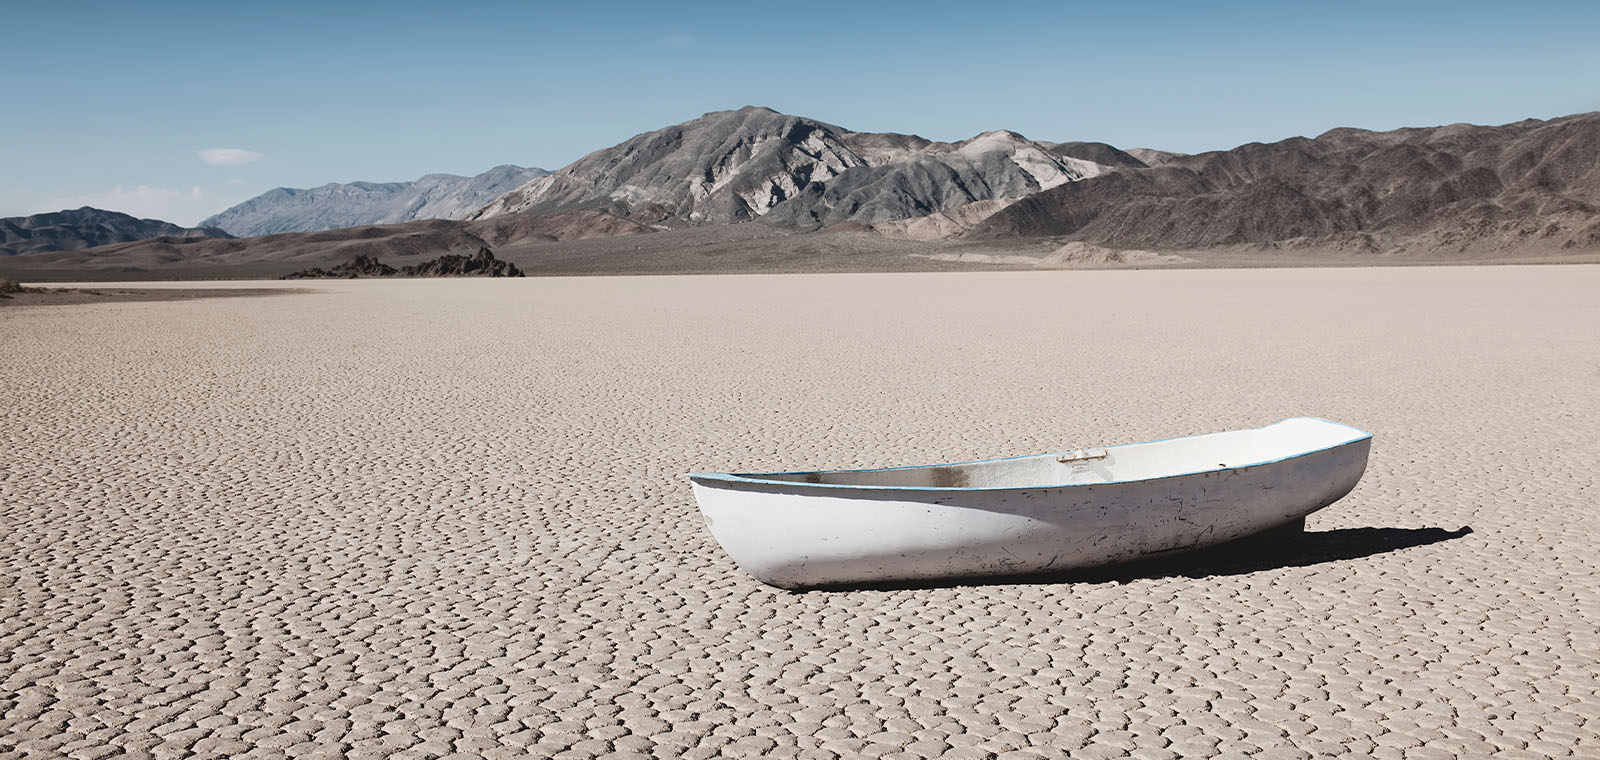 A lone white wooden rowboat rests stranded on a dry, cracked lakebed, contrasting the brown and black parched landscape.